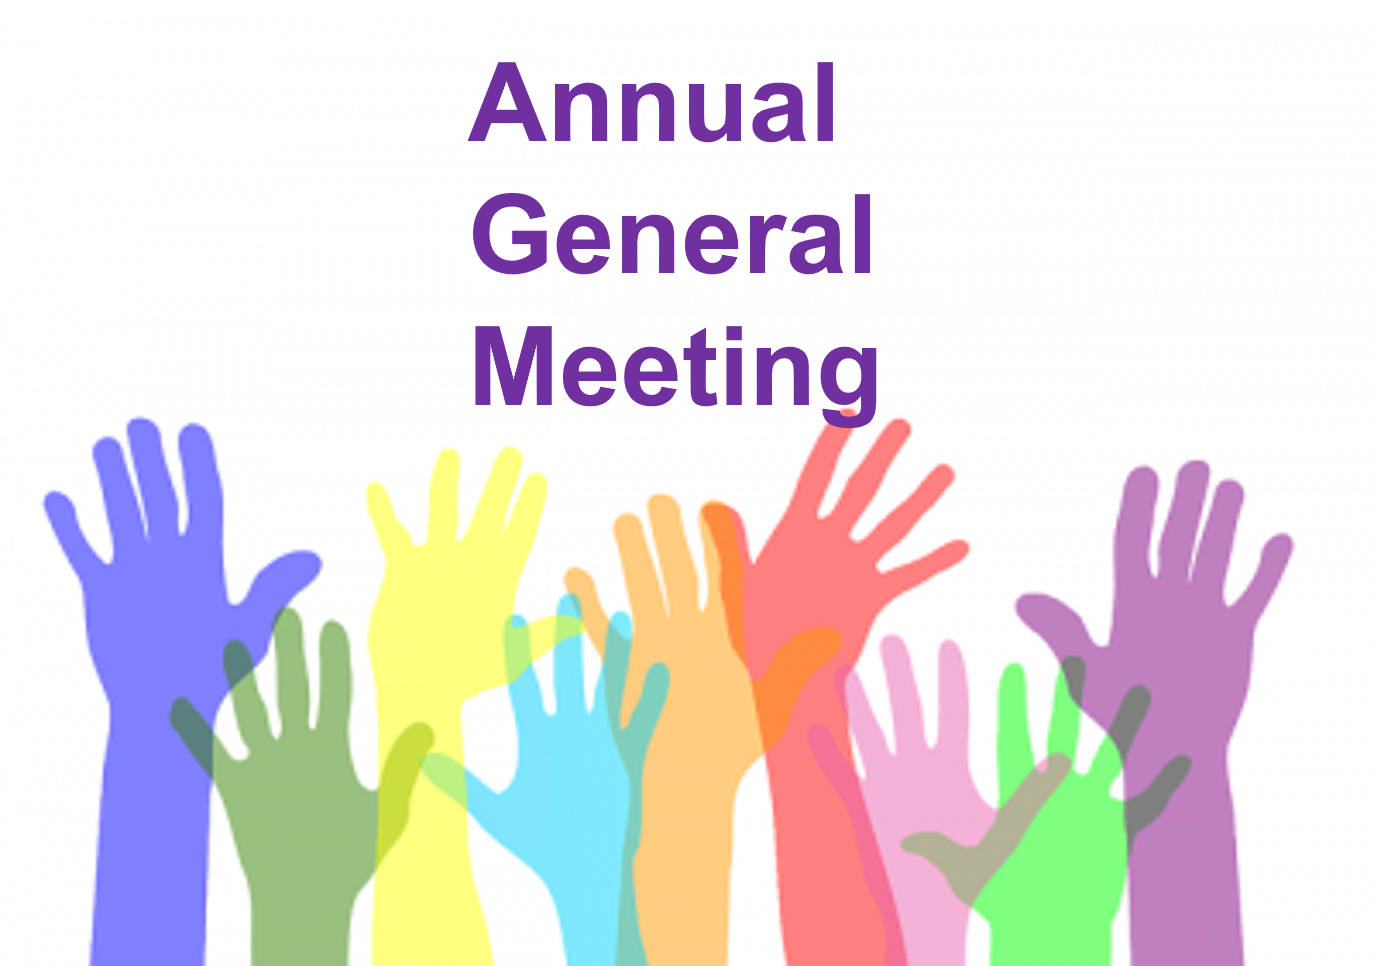 OWN Qld Annual General Meeting